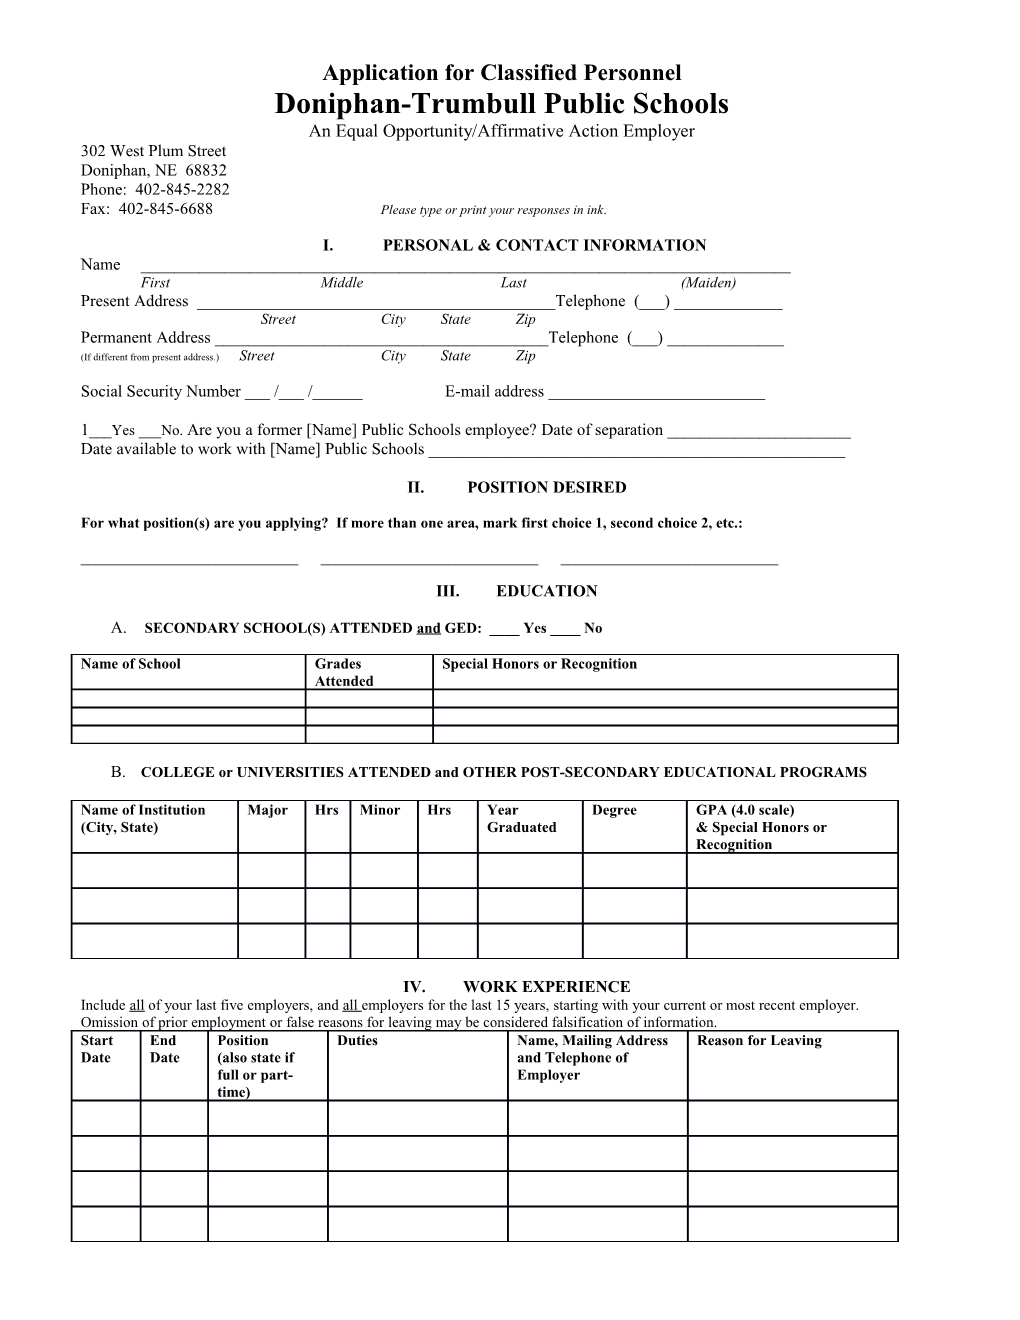 Application for Classified Personnel